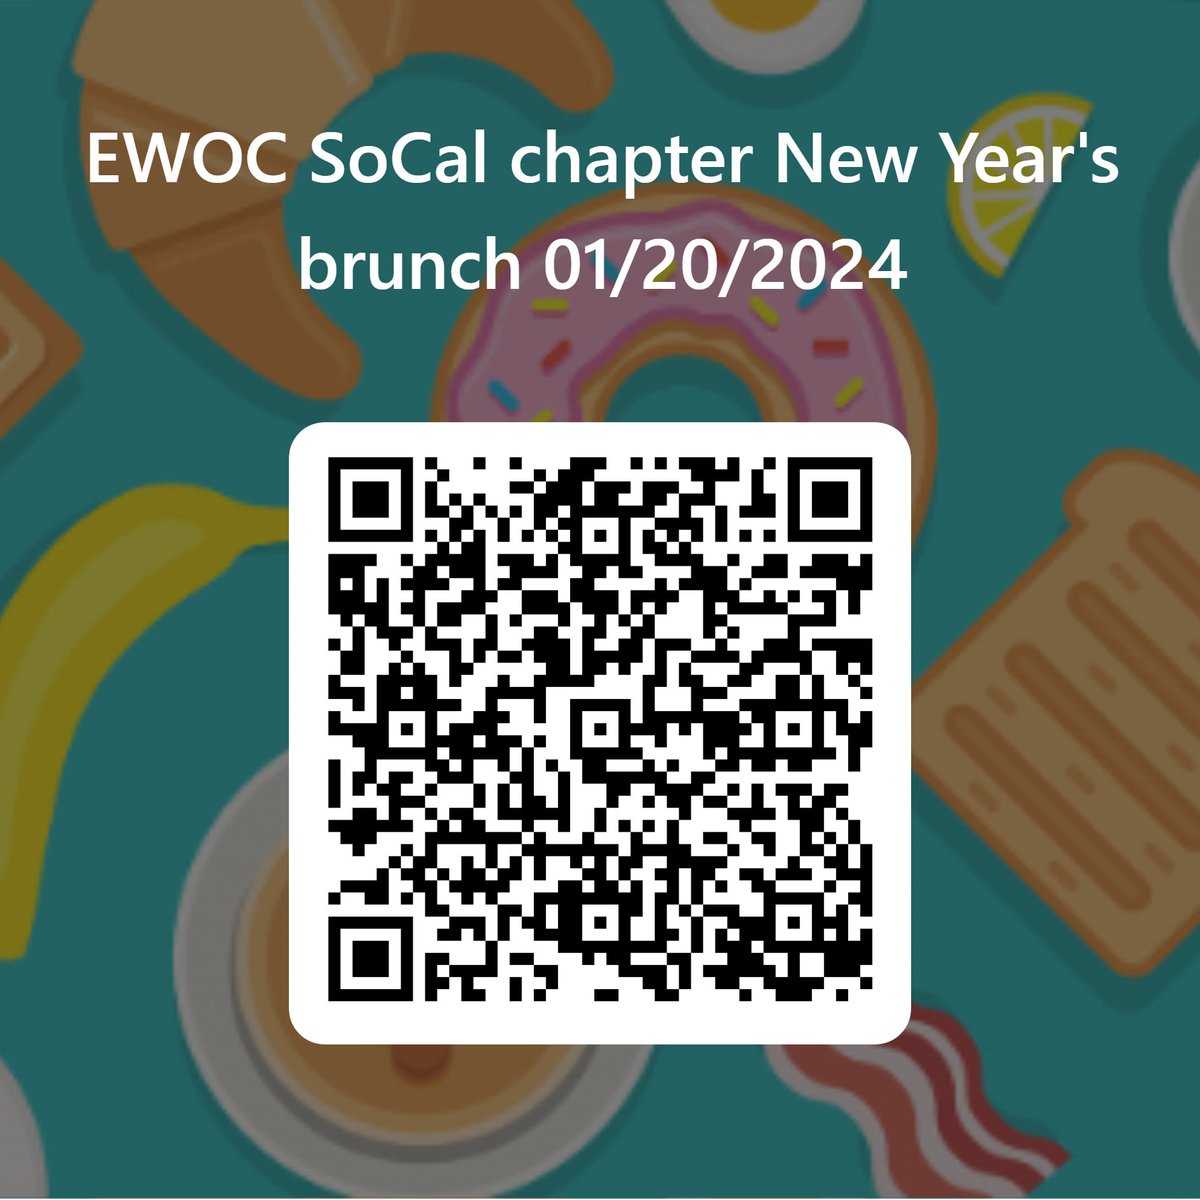 Happy New Year! We hope 2024 is off to a good start for you - and it will get better: Join the EWOC SoCal chapter for a New Year's brunch on 01/20/2024 - sign up for free here: